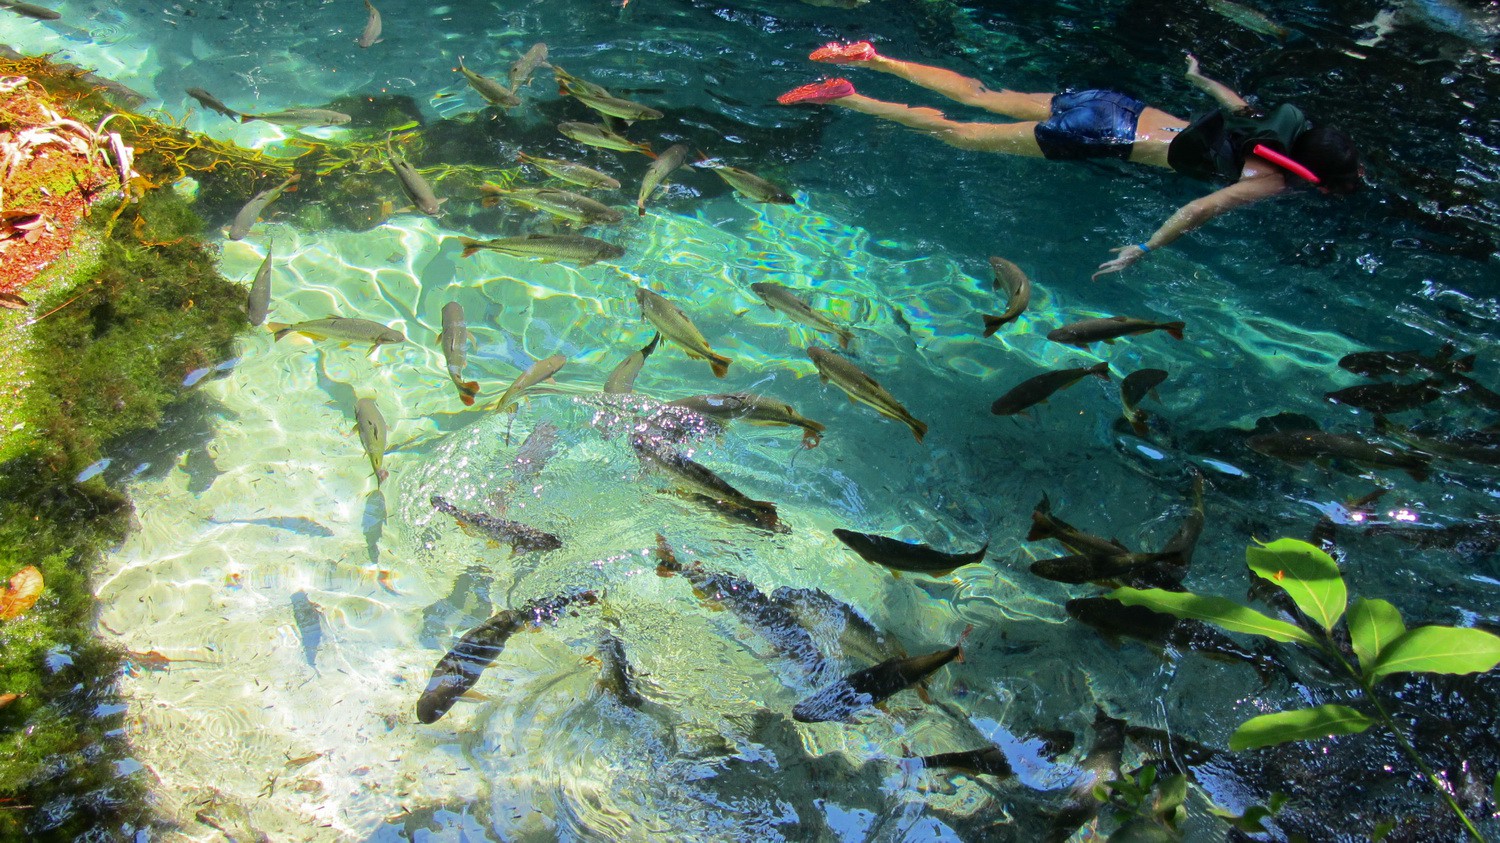 Snorkeling with many fishes